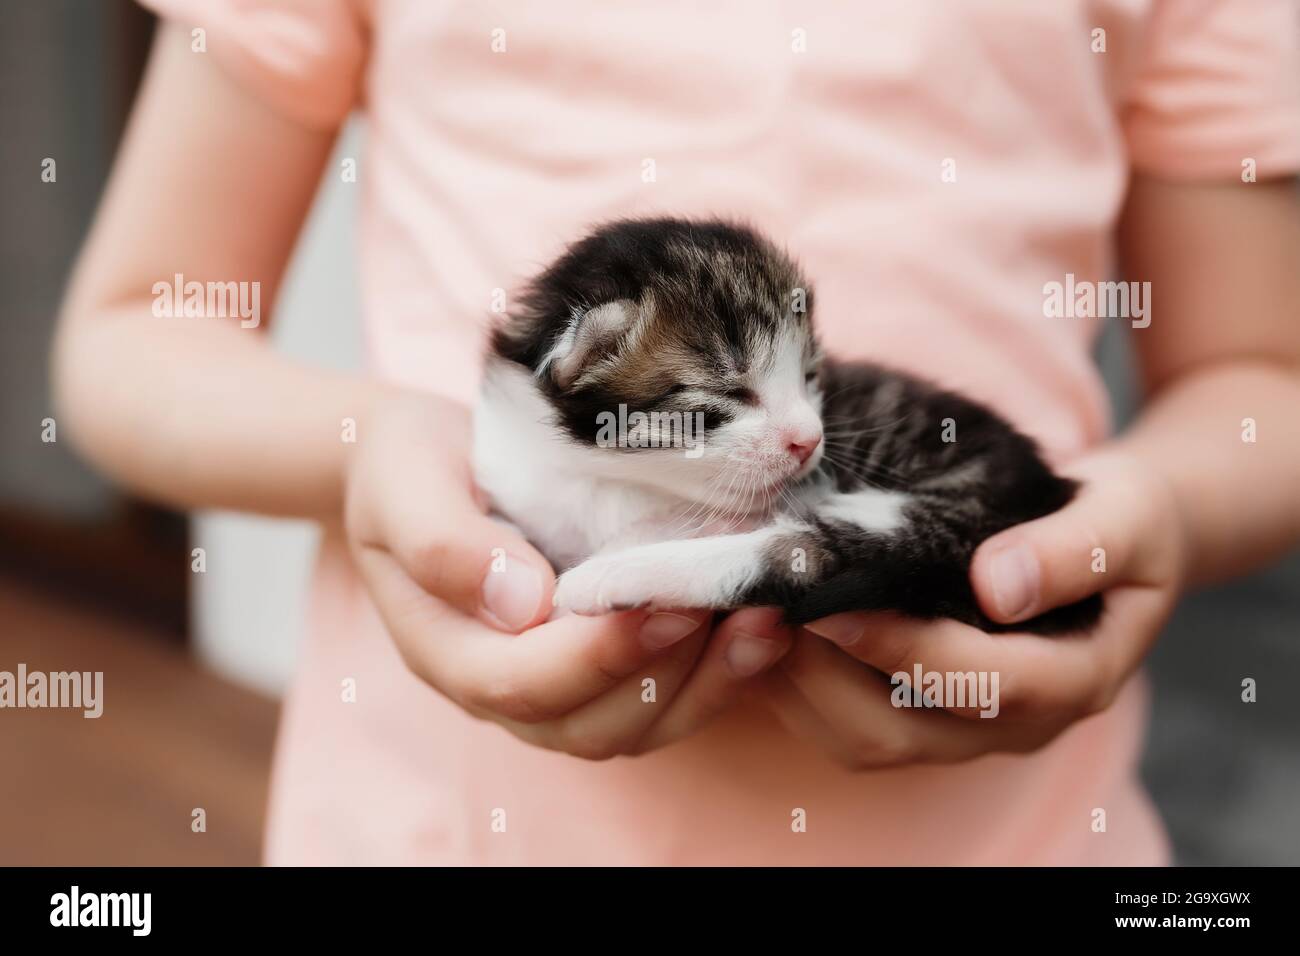 Little girl holding a little kitten with closed eyes in her arms. Pet care concept. Child playing with adorable newborn cat. High quality photo Stock Photo